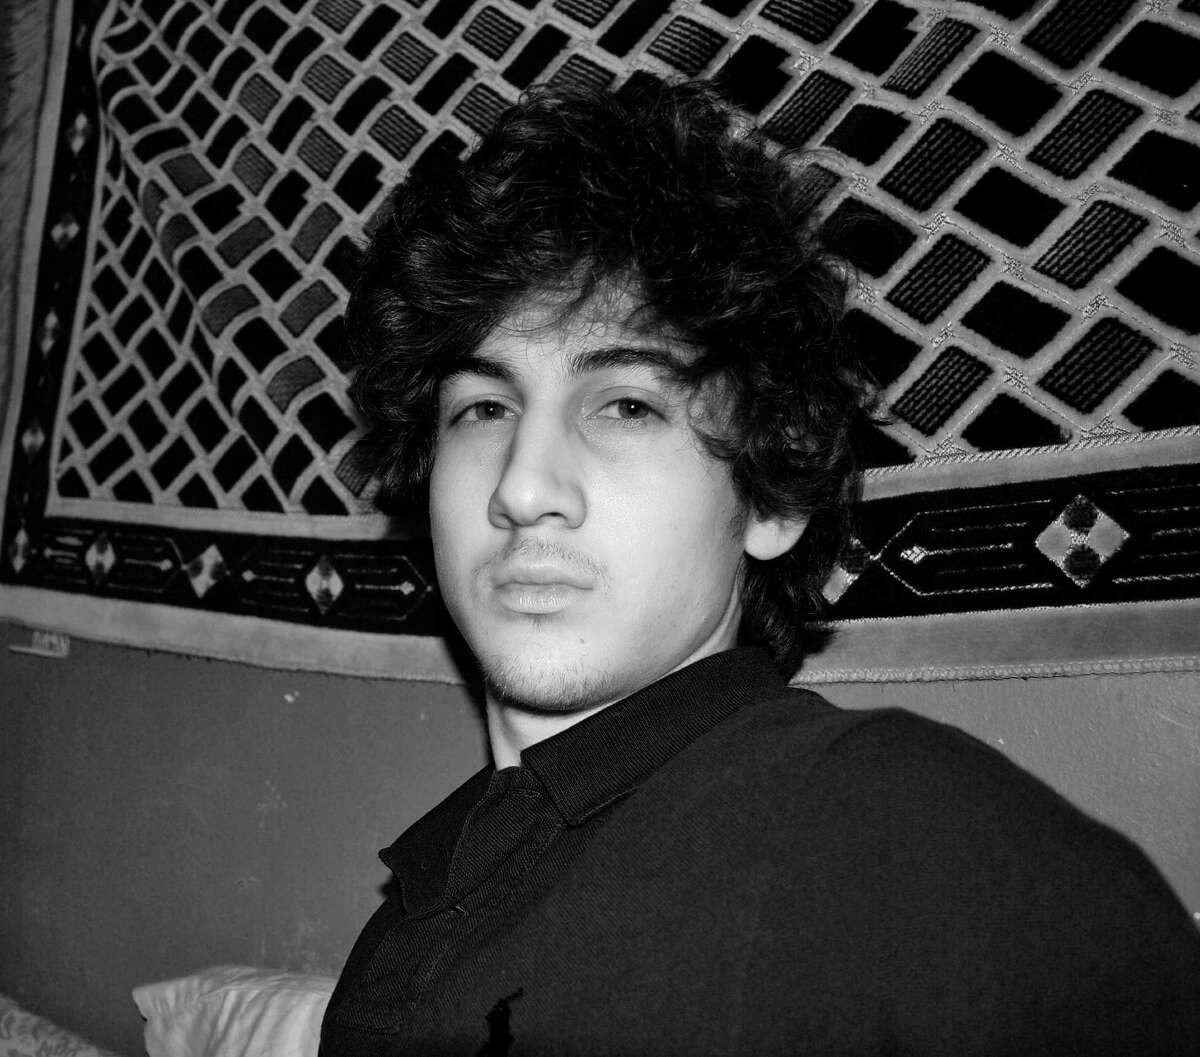 This undated photo provided by the vkontakte website shows Dzhokhar Tsarnaev. Dzhokhar Tsarnaev has been on the run, described as "armed and dangerous" and suspected of the Boston Marathon bombing. His brother, Tamerlan, was killed during a violent police chase. The two ethnic Chechen brothers came from Dagestan, a Russian republic bordering the province of Chechnya.